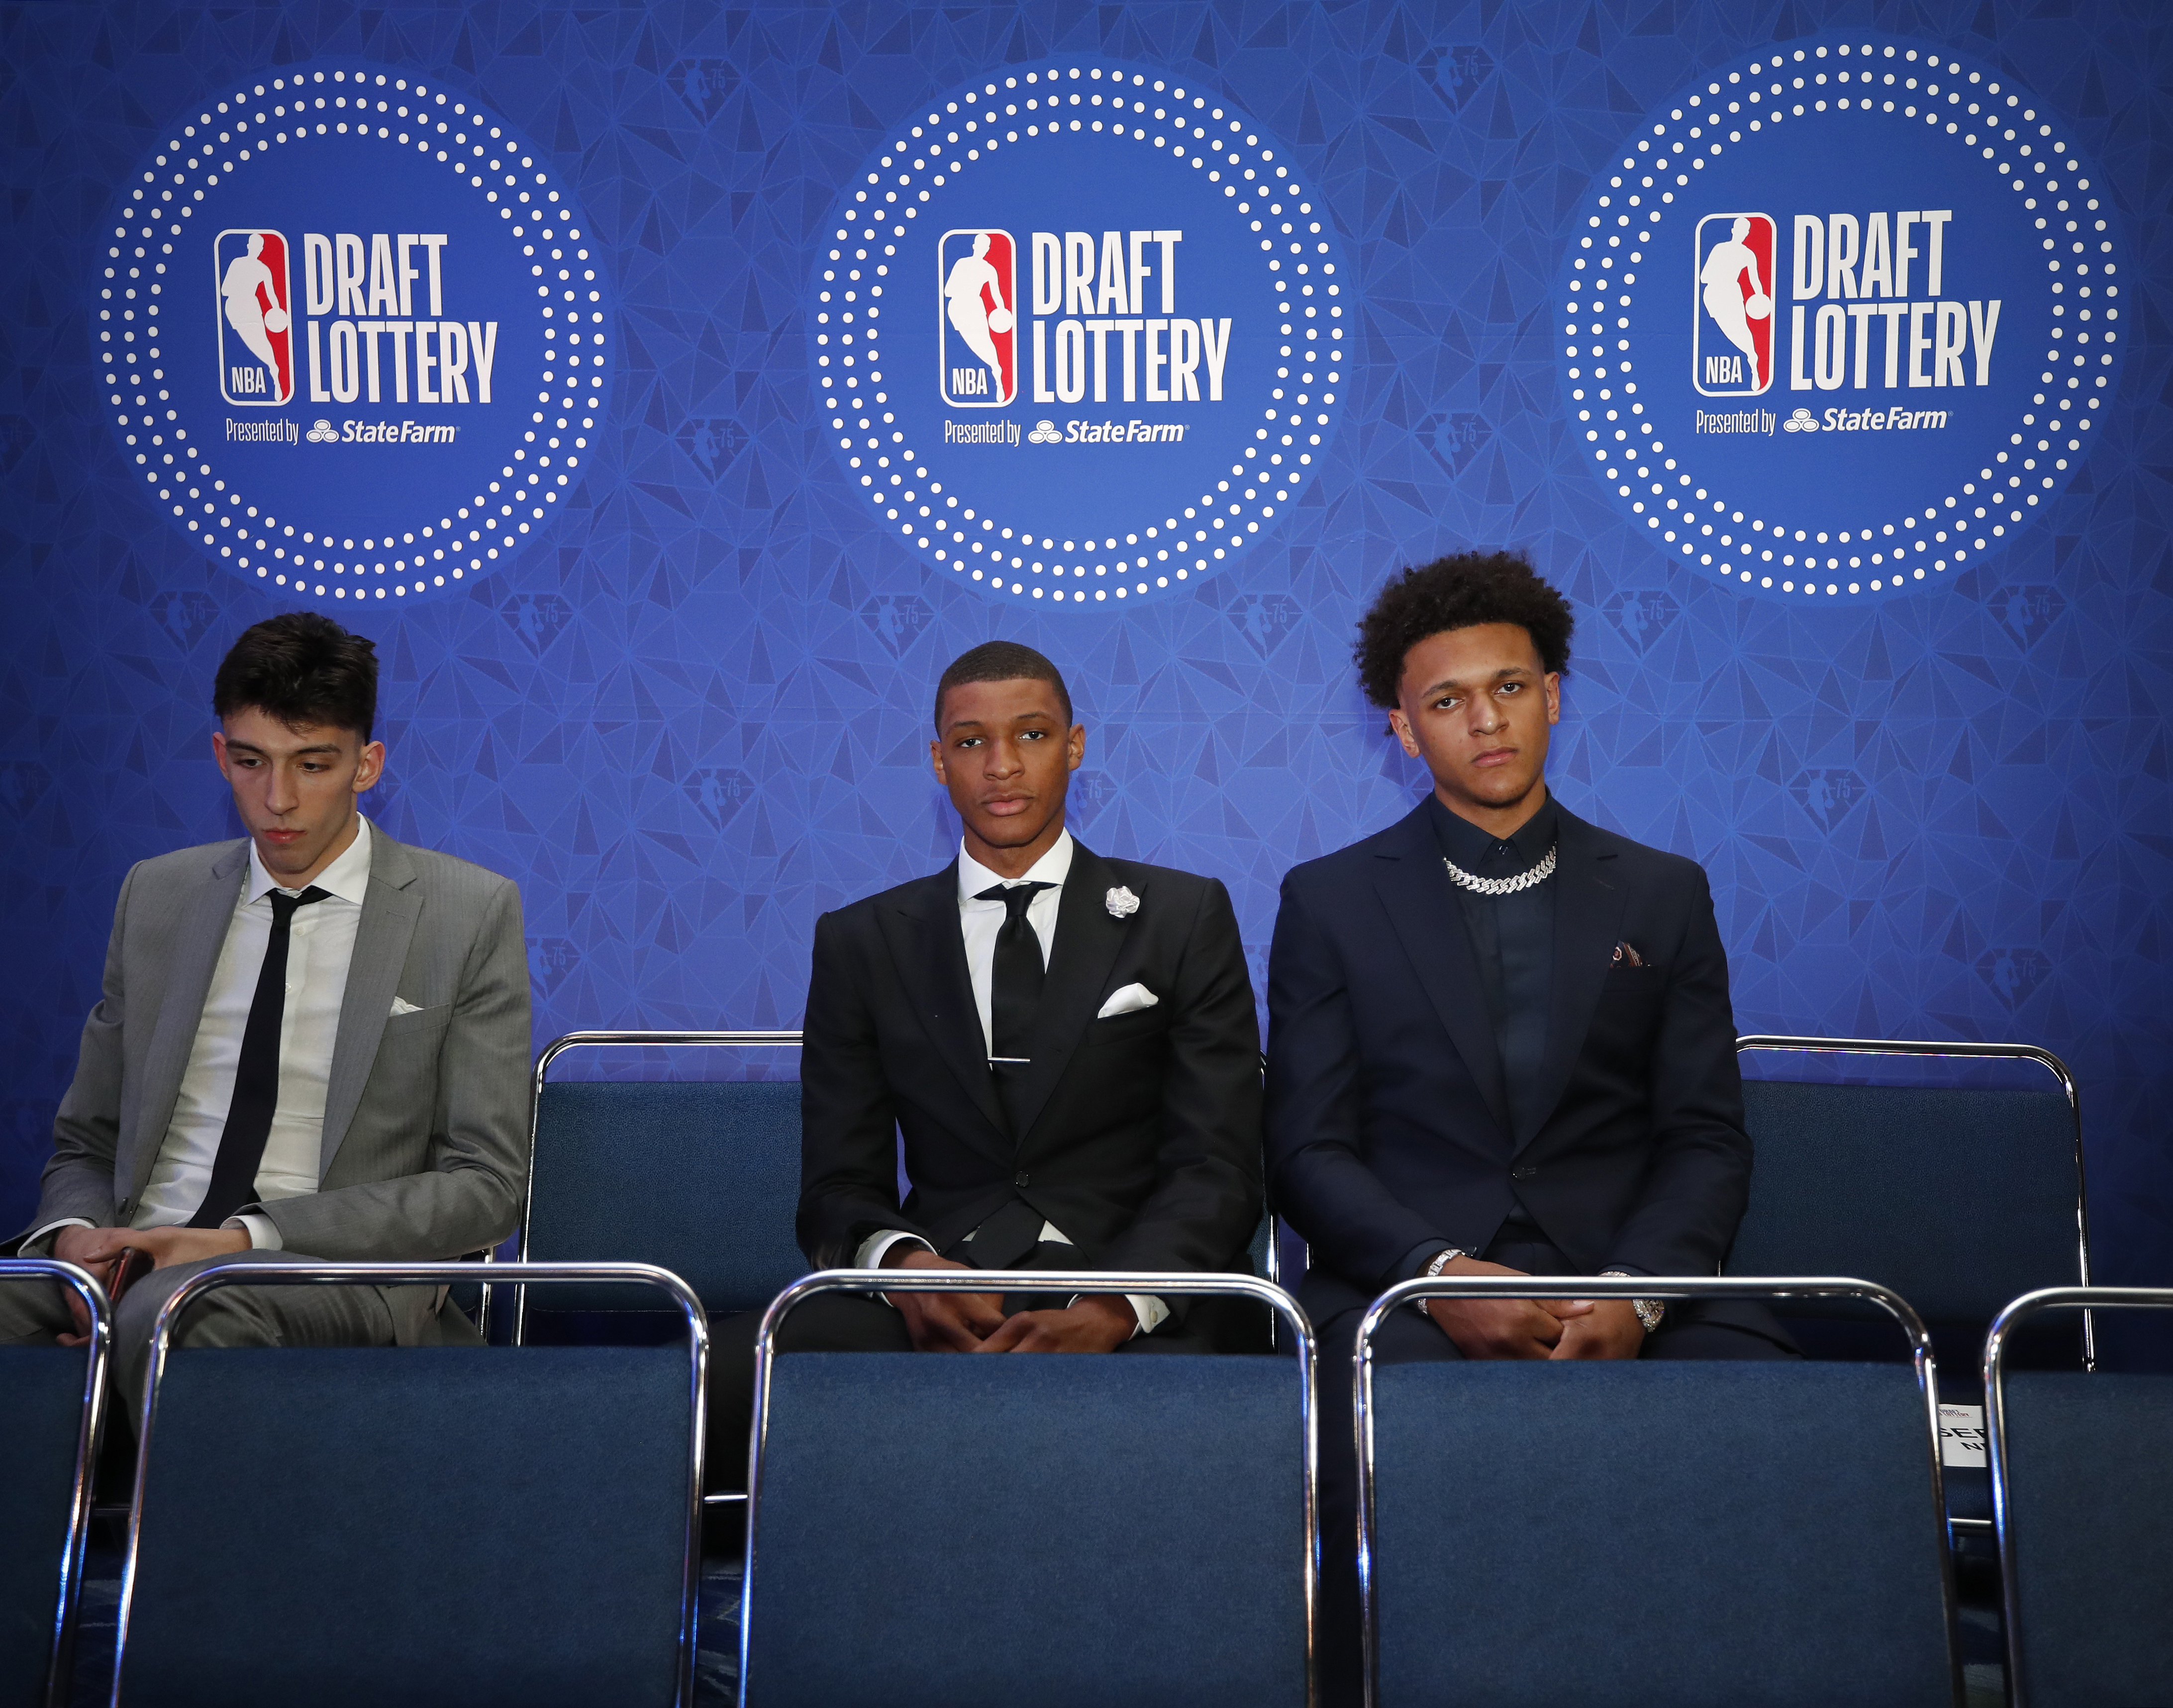 NBA Prospects, Chet Holmgren, Jabari Smith and Paolo Banchero look on during the 2022 NBA Draft Lottery at McCormick Place on May 17, 2022 in Chicago, Illinois.